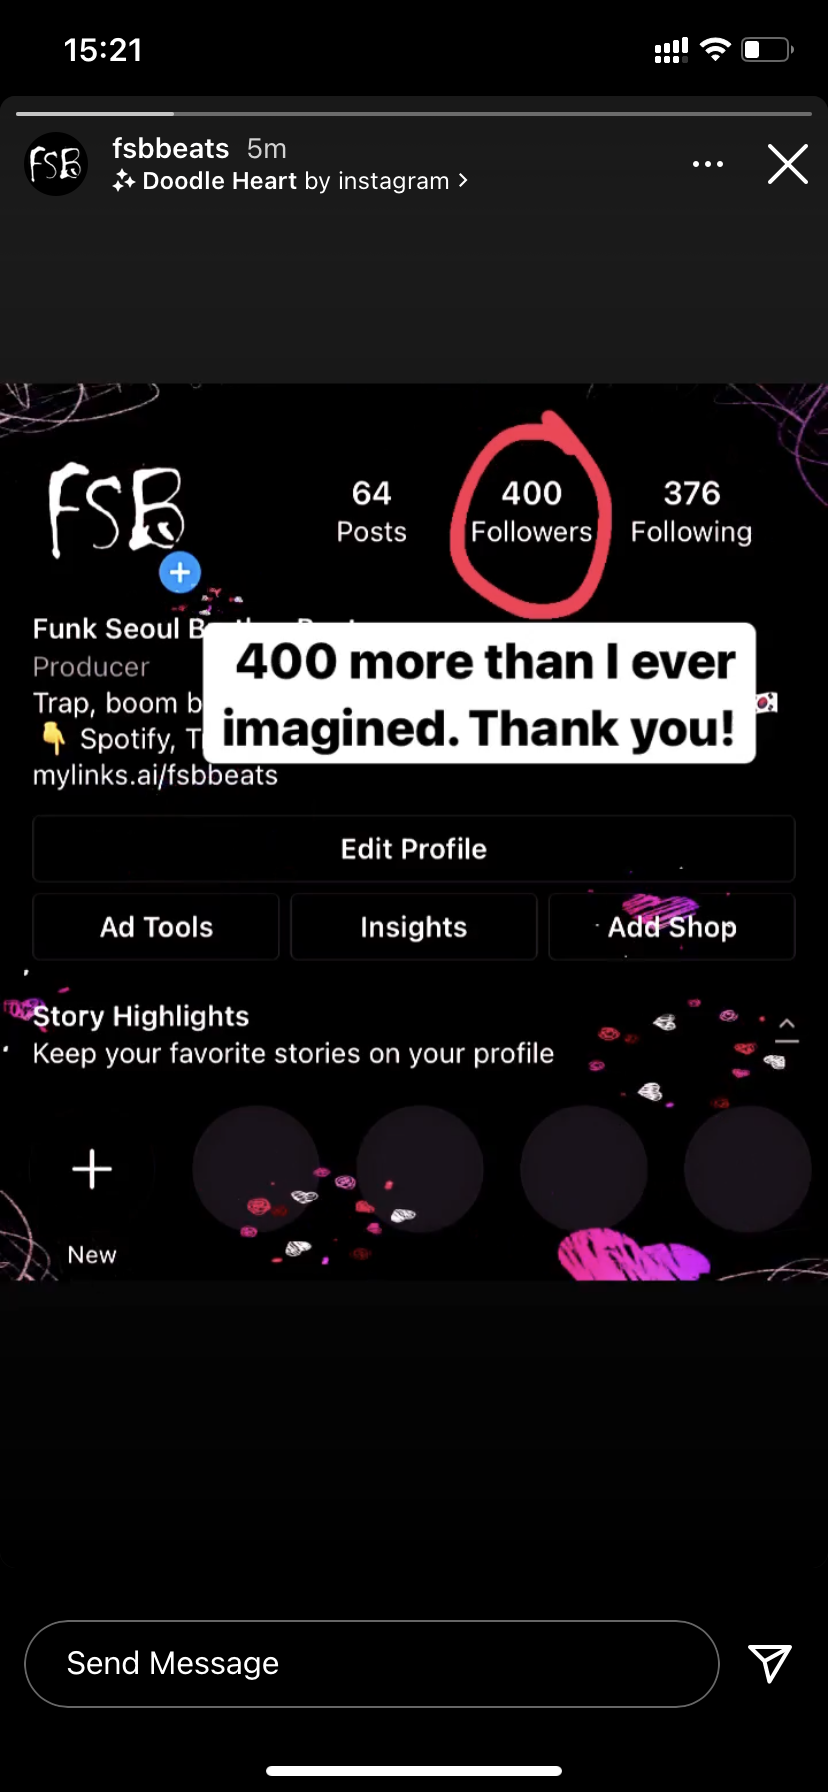 Funk Seoul Brother Beats' Instagram story in which he celebrated 400 followers